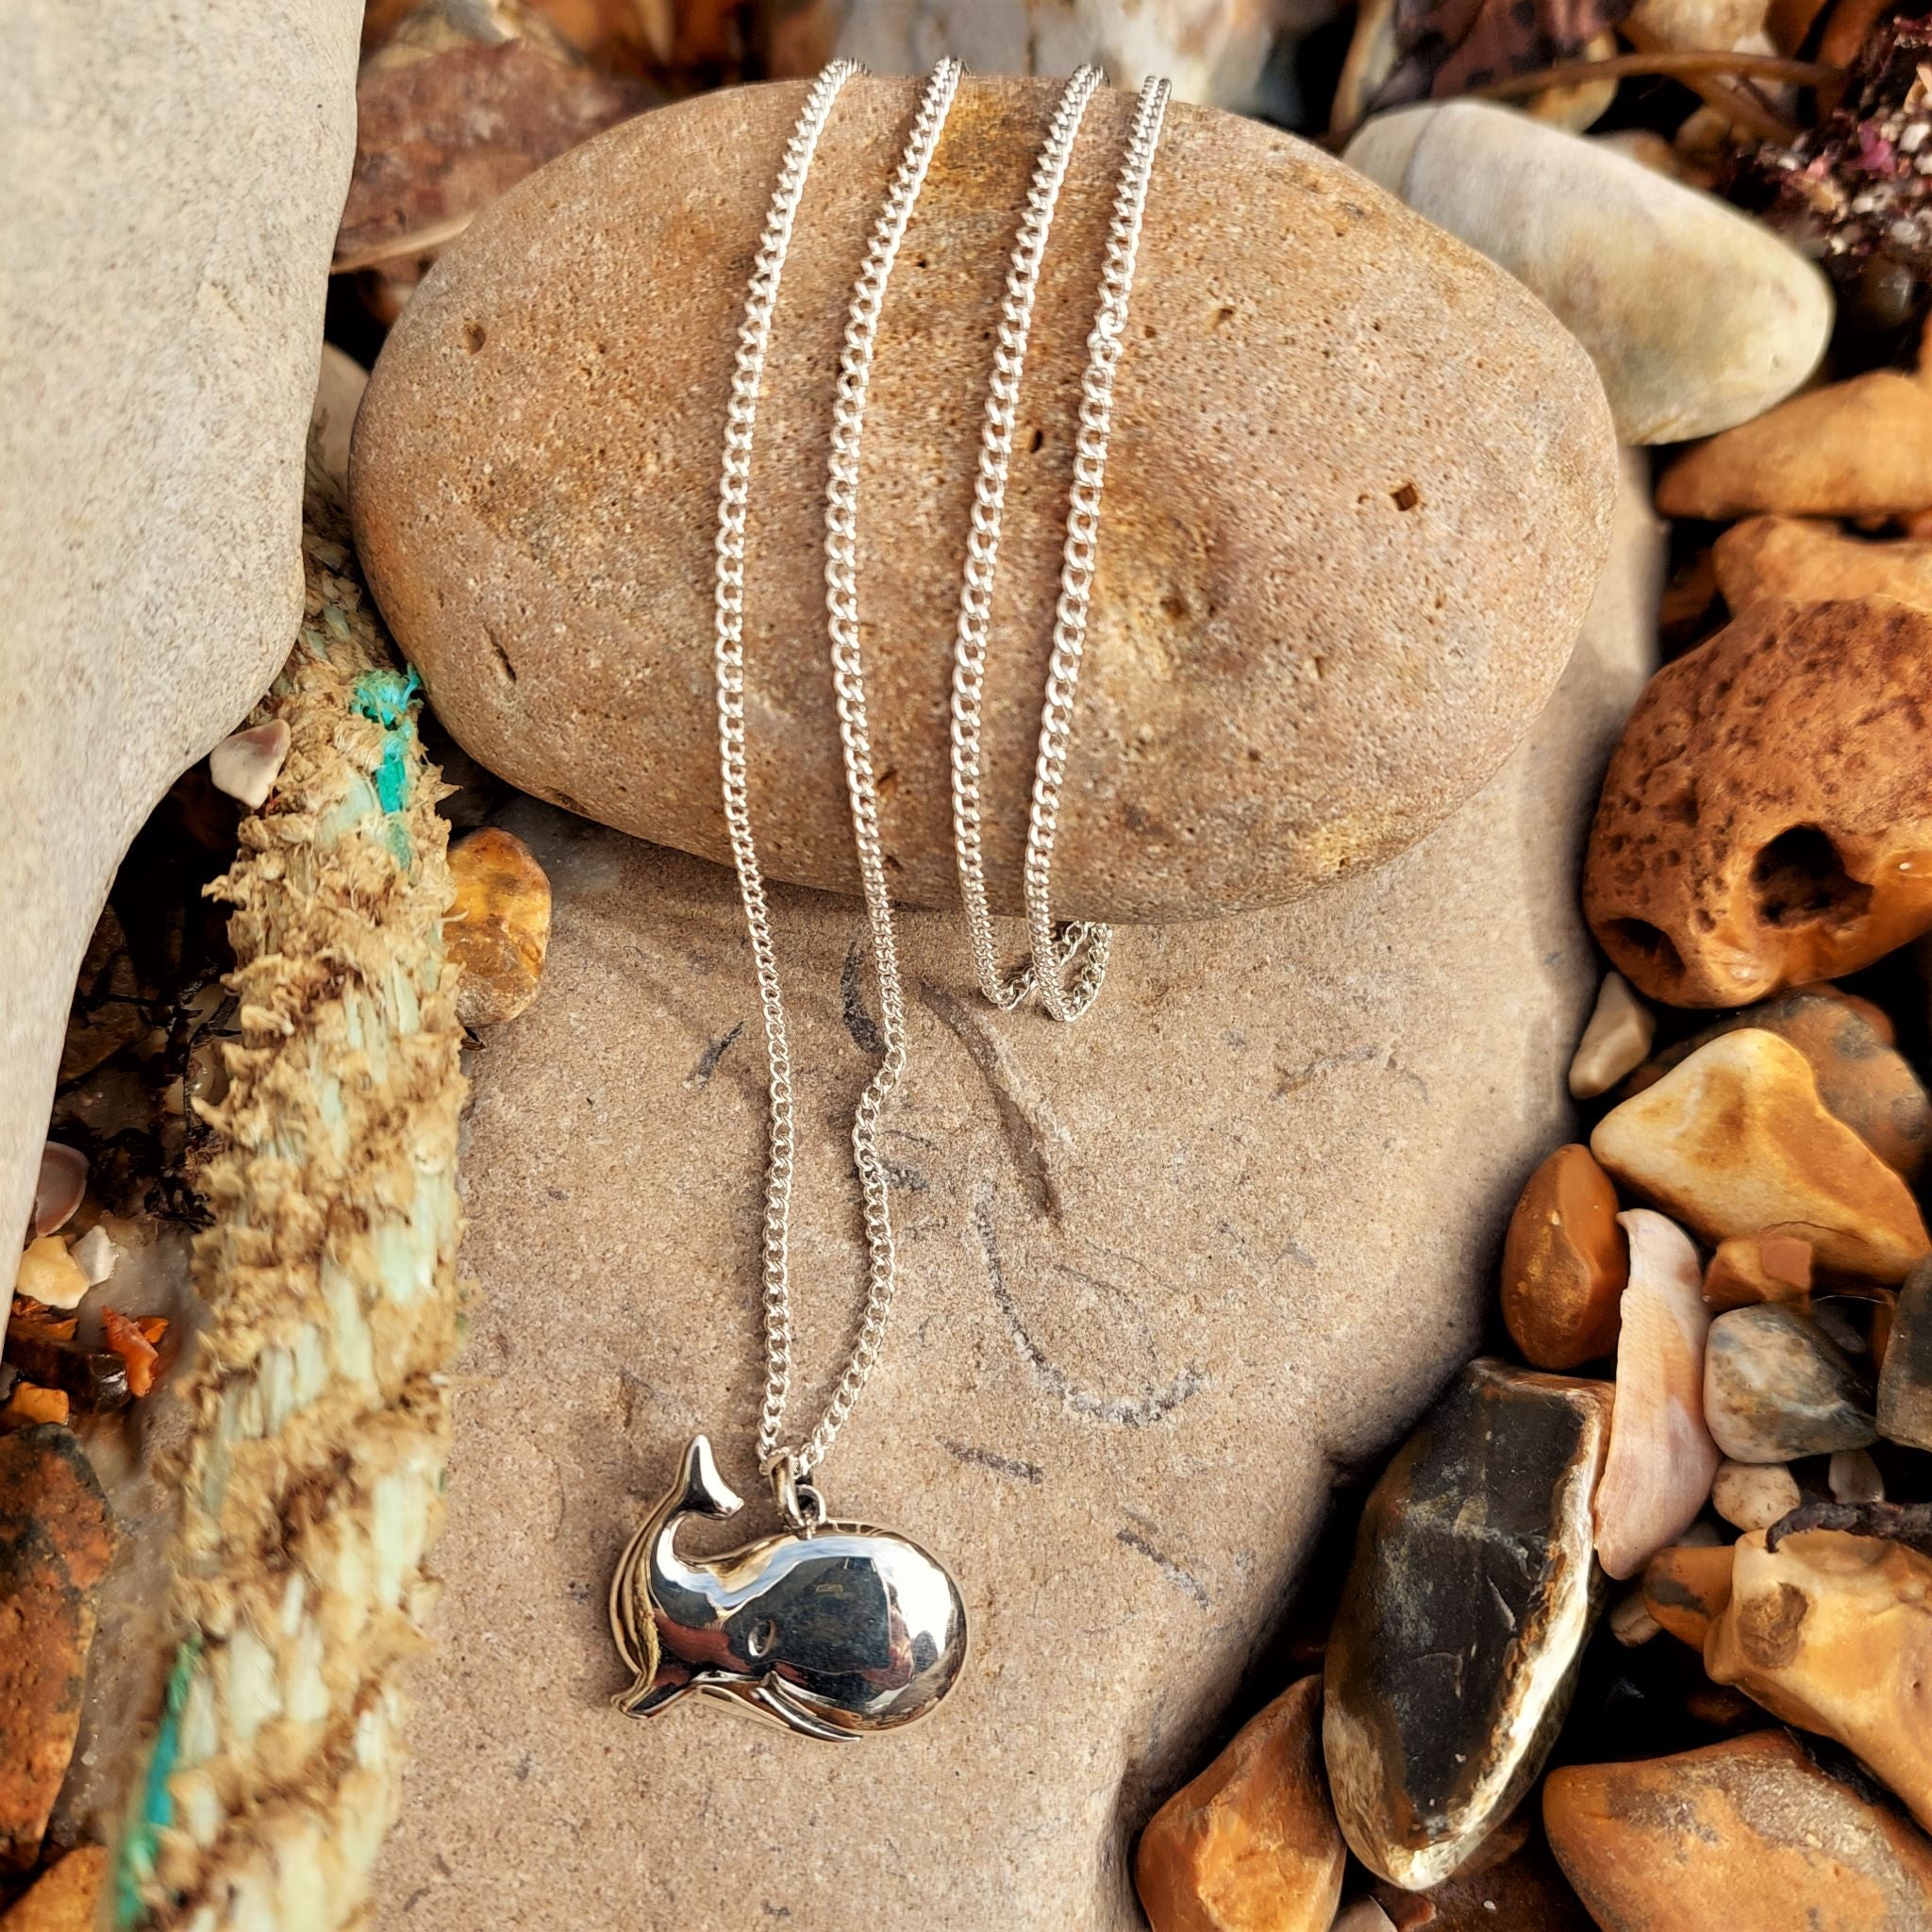 How cute is this Whale pendant?   ﻿925 Hall Marked Silver  H 21 mm x W 25 mm  Long 26" Sterling Silver curb chain with lobster clasp  Make someone's day with the super smiley Moby!   ﻿**Presented in lovely Kraft paper gift box with reusable organza pouch**  ﻿﻿